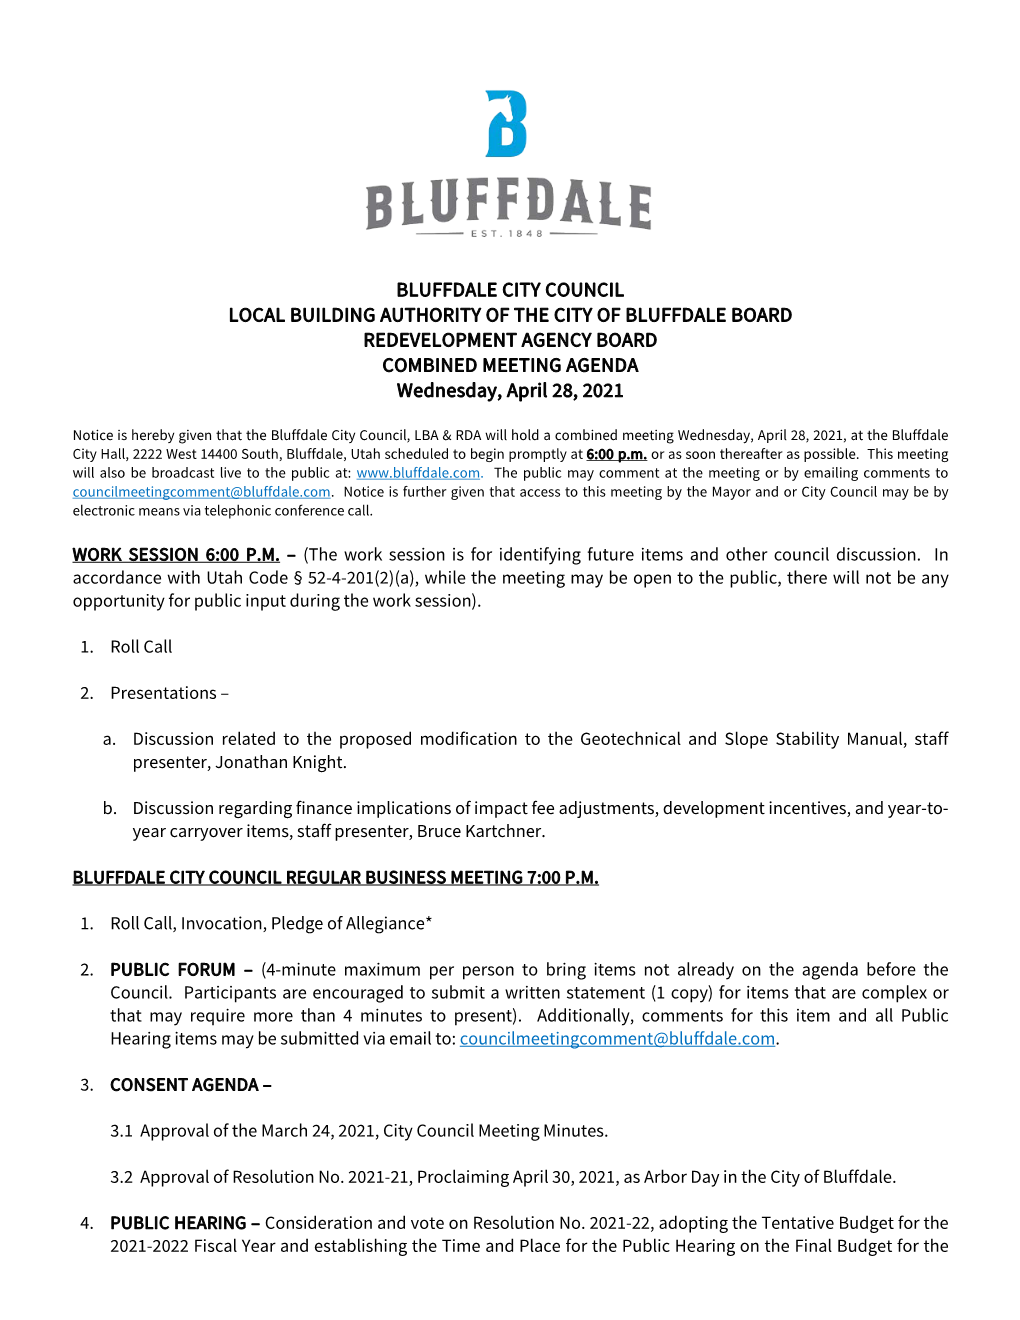 BLUFFDALE CITY COUNCIL LOCAL BUILDING AUTHORITY of the CITY of BLUFFDALE BOARD REDEVELOPMENT AGENCY BOARD COMBINED MEETING AGENDA Wednesday, April 28, 2021